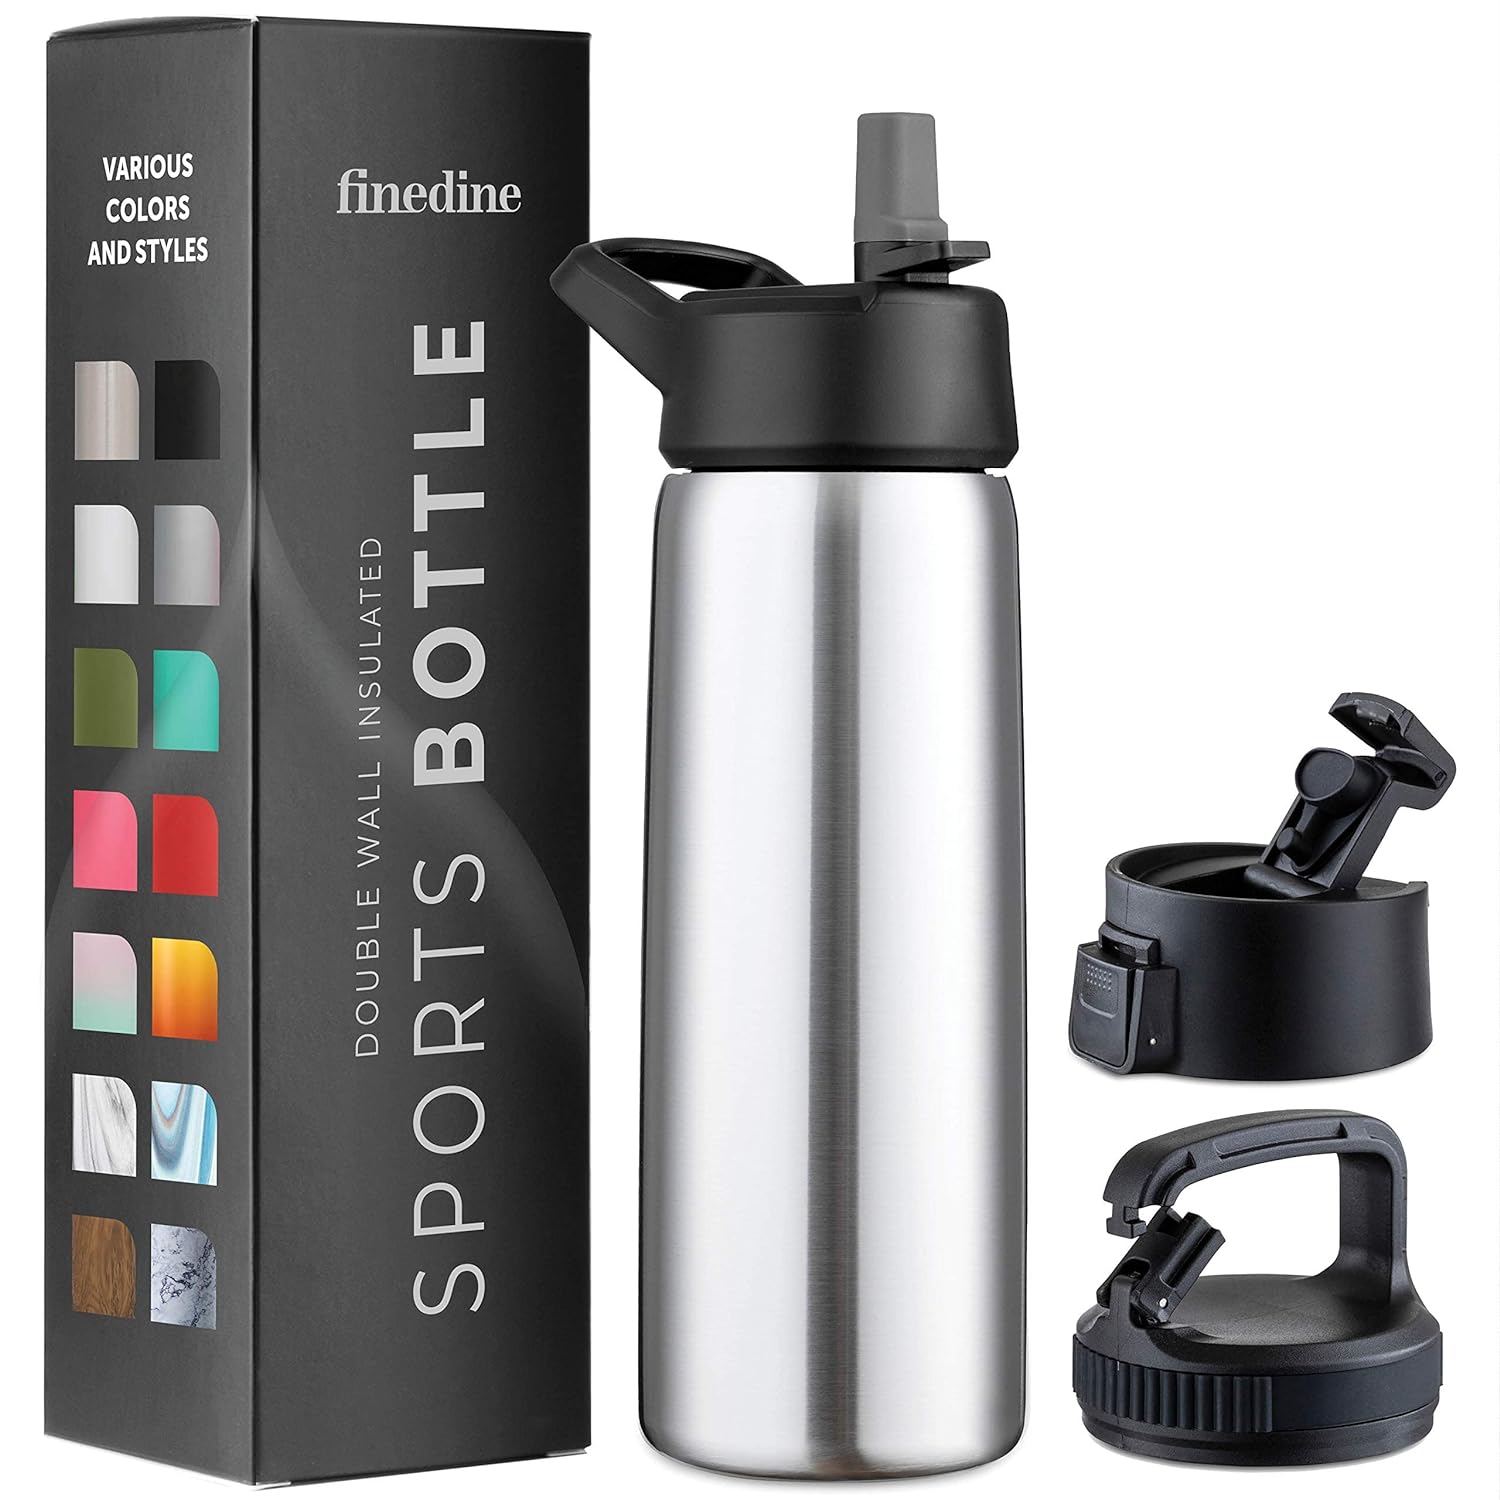 FineDine Triple Insulated Stainless Steel Water Bottle with Straw Lid - Flip Top Lid - Wide Mouth Cap Insulated Water Bottles, Keeps Hot and Cold 750ml Brushed Stainless Steel